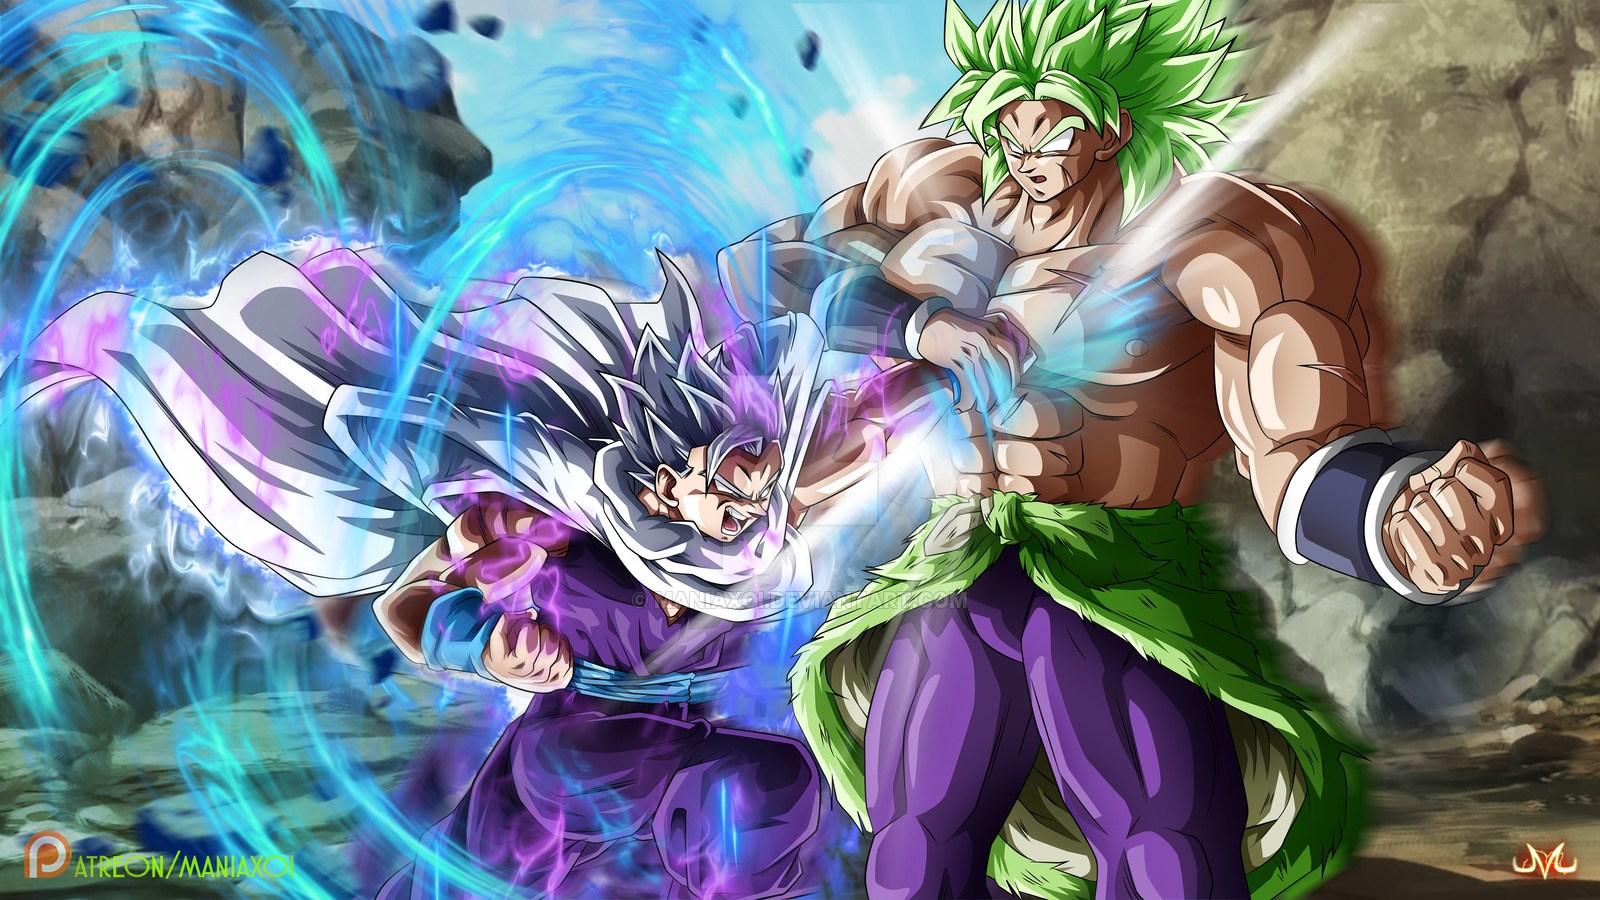 Download Dragon Ball Super Broly wallpapers for mobile phone free  Dragon Ball Super Broly HD pictures